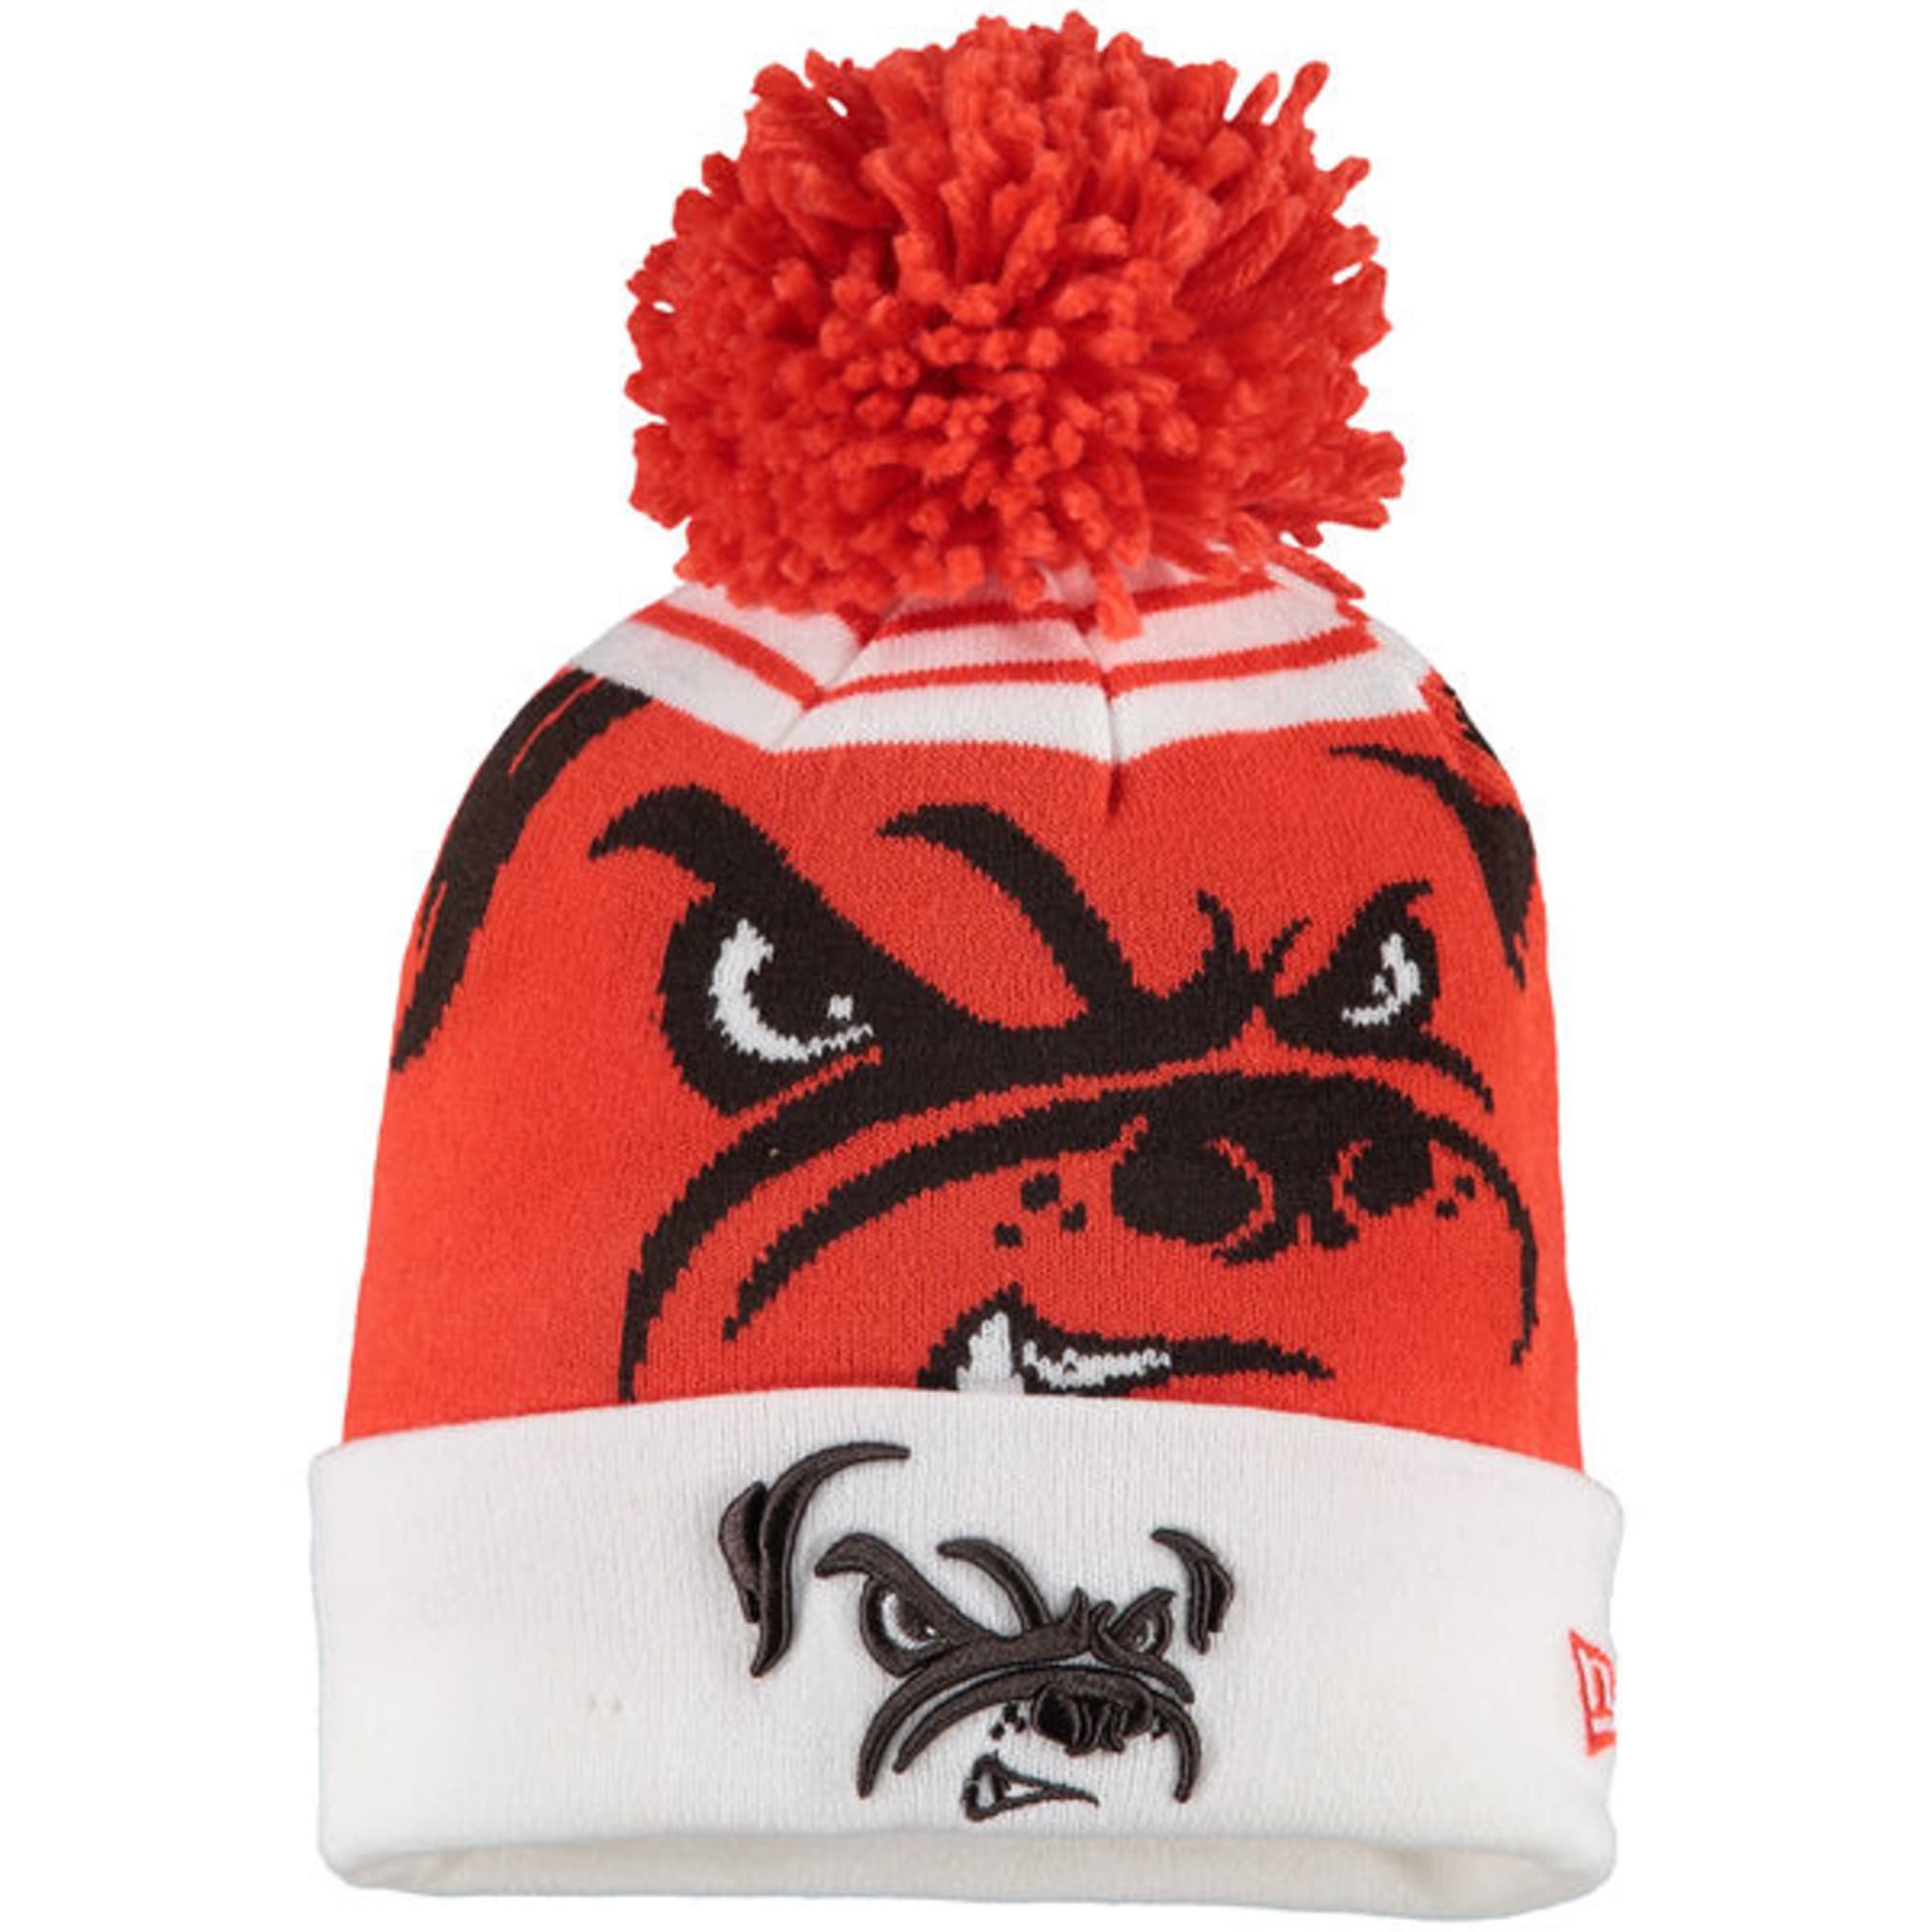 Cleveland Browns Christmas Gift Guide 10 Browns presents